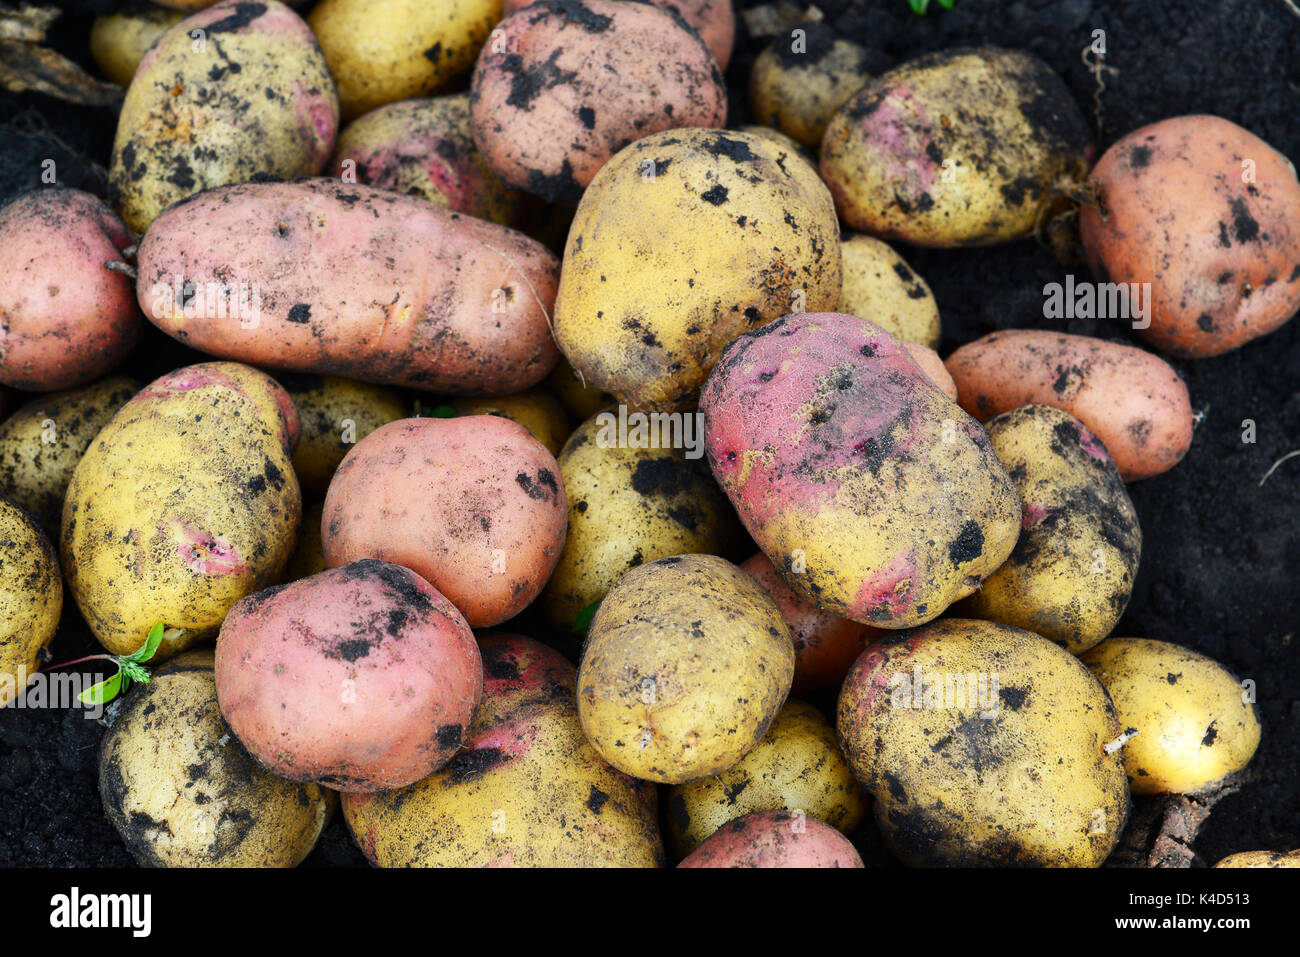 Potatoes of different varieties lie on ground Stock Photo